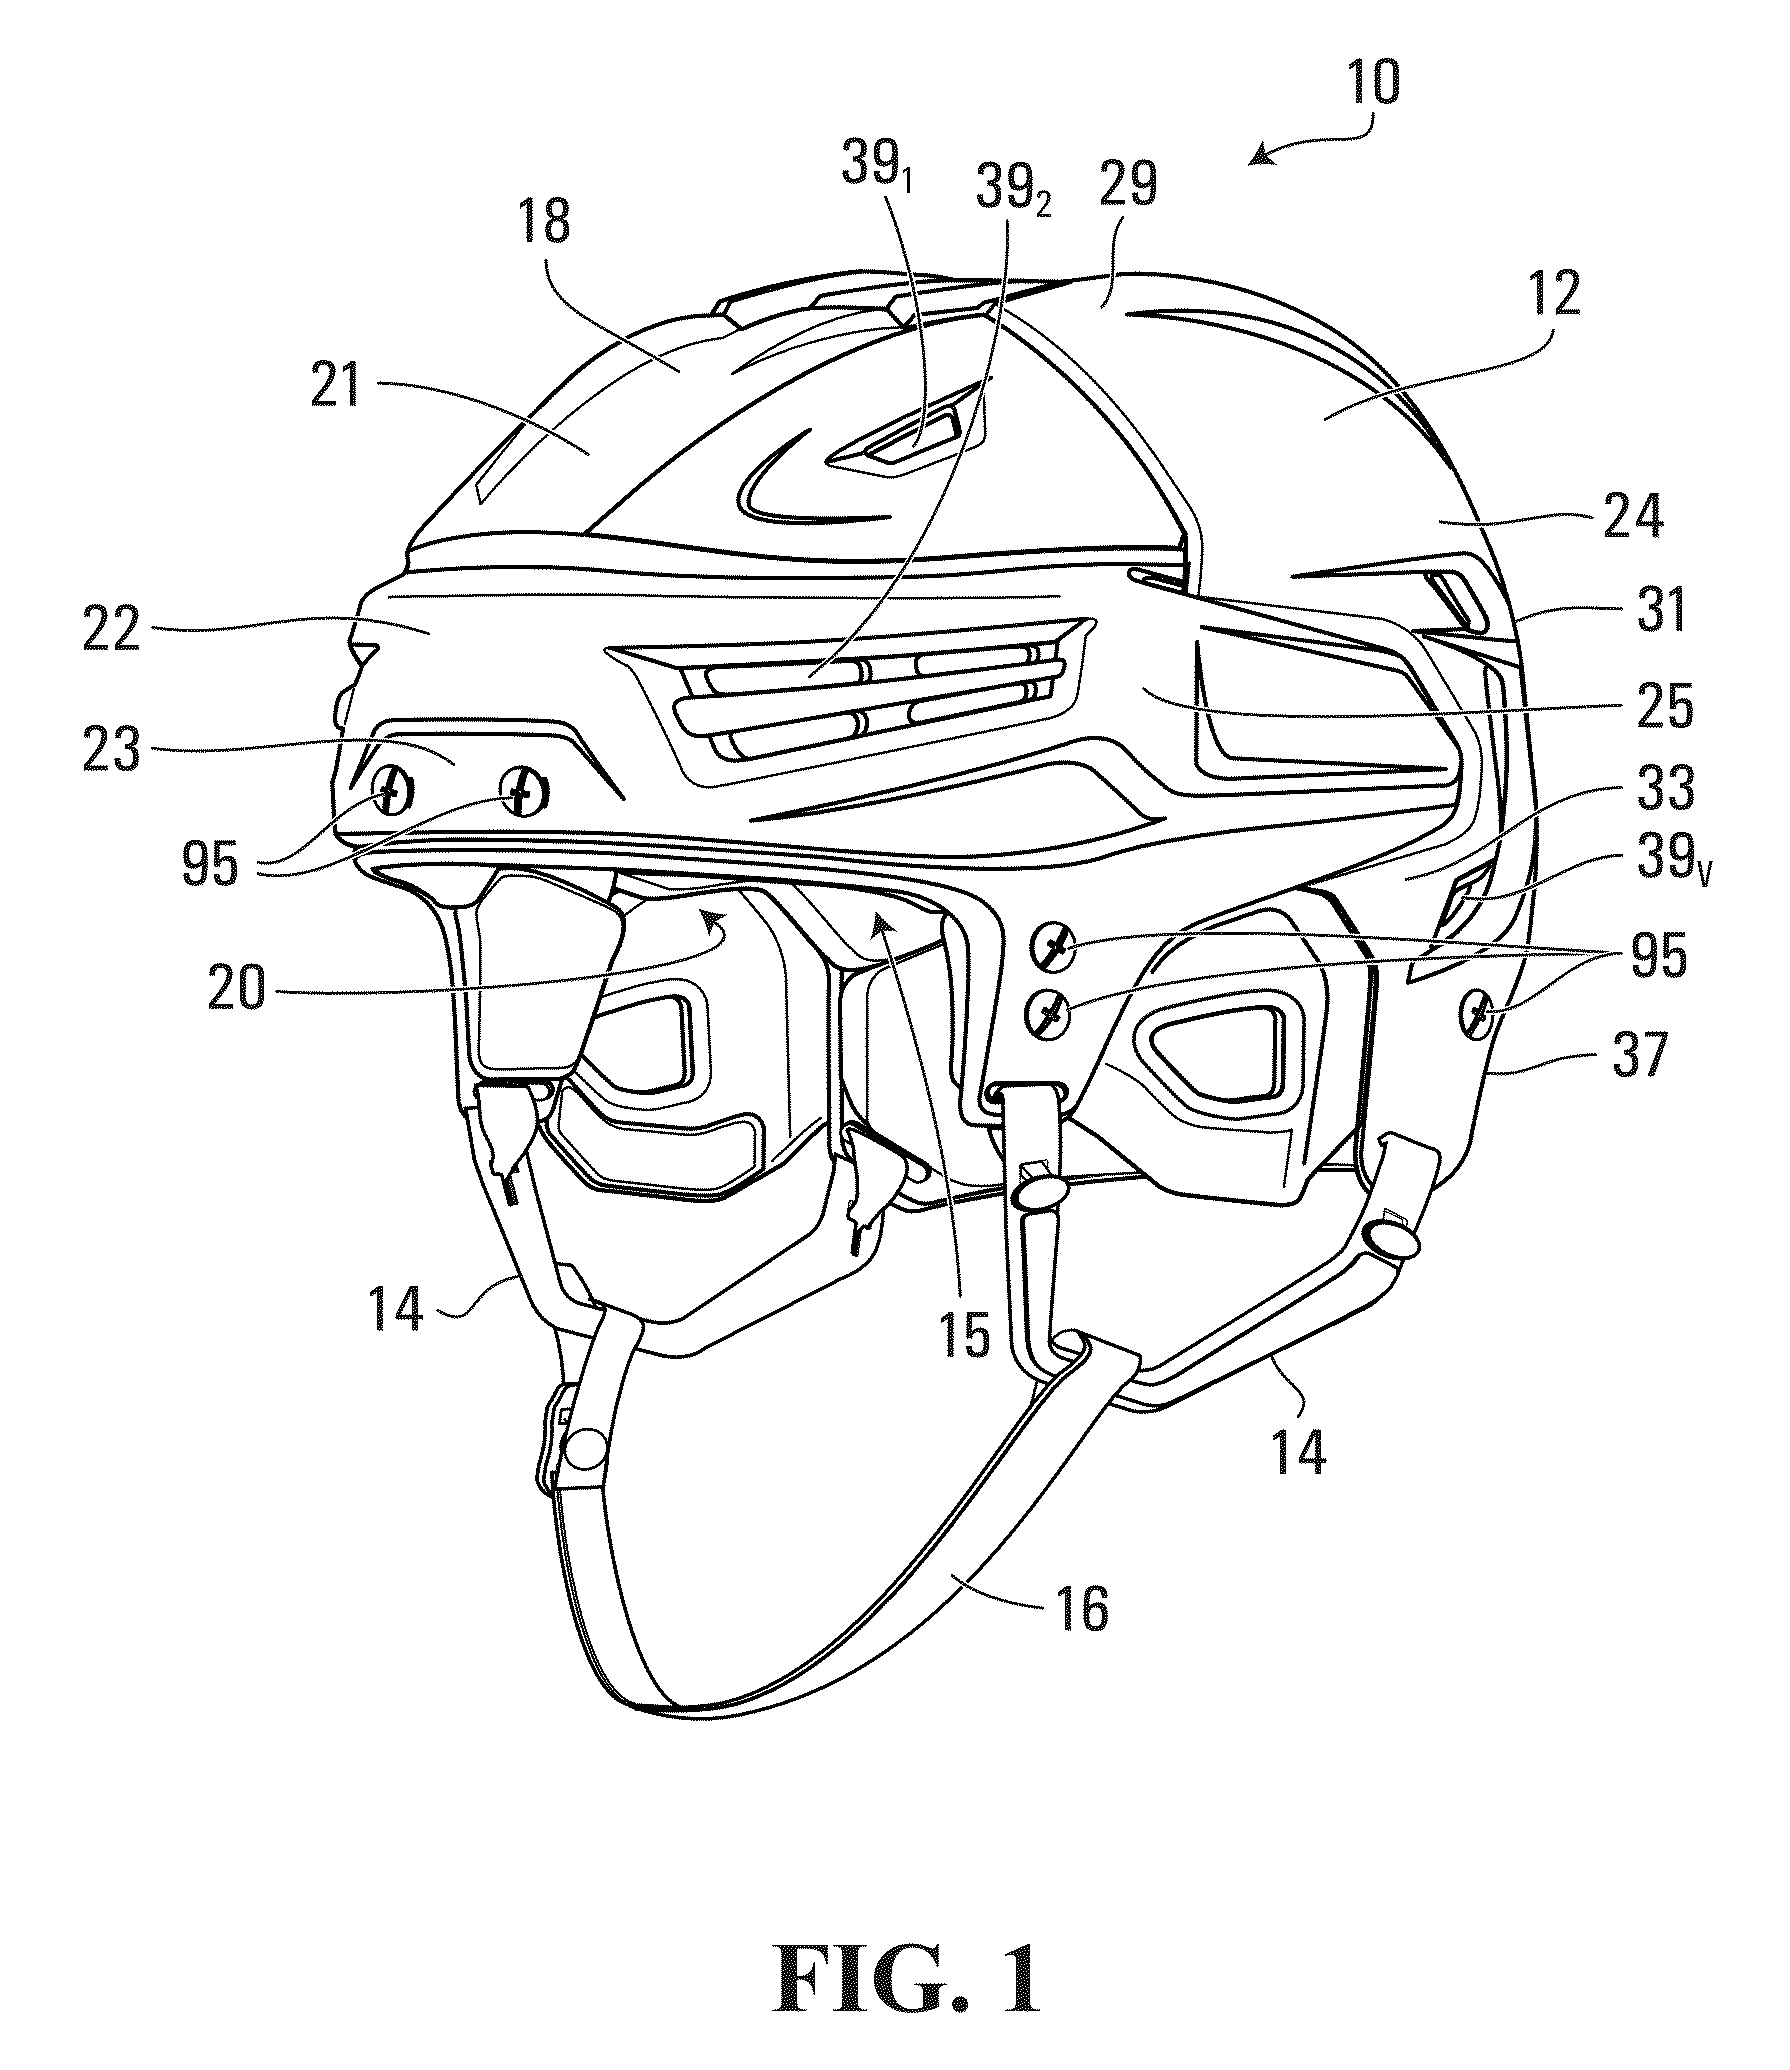 Sports helmet with rotational impact protection